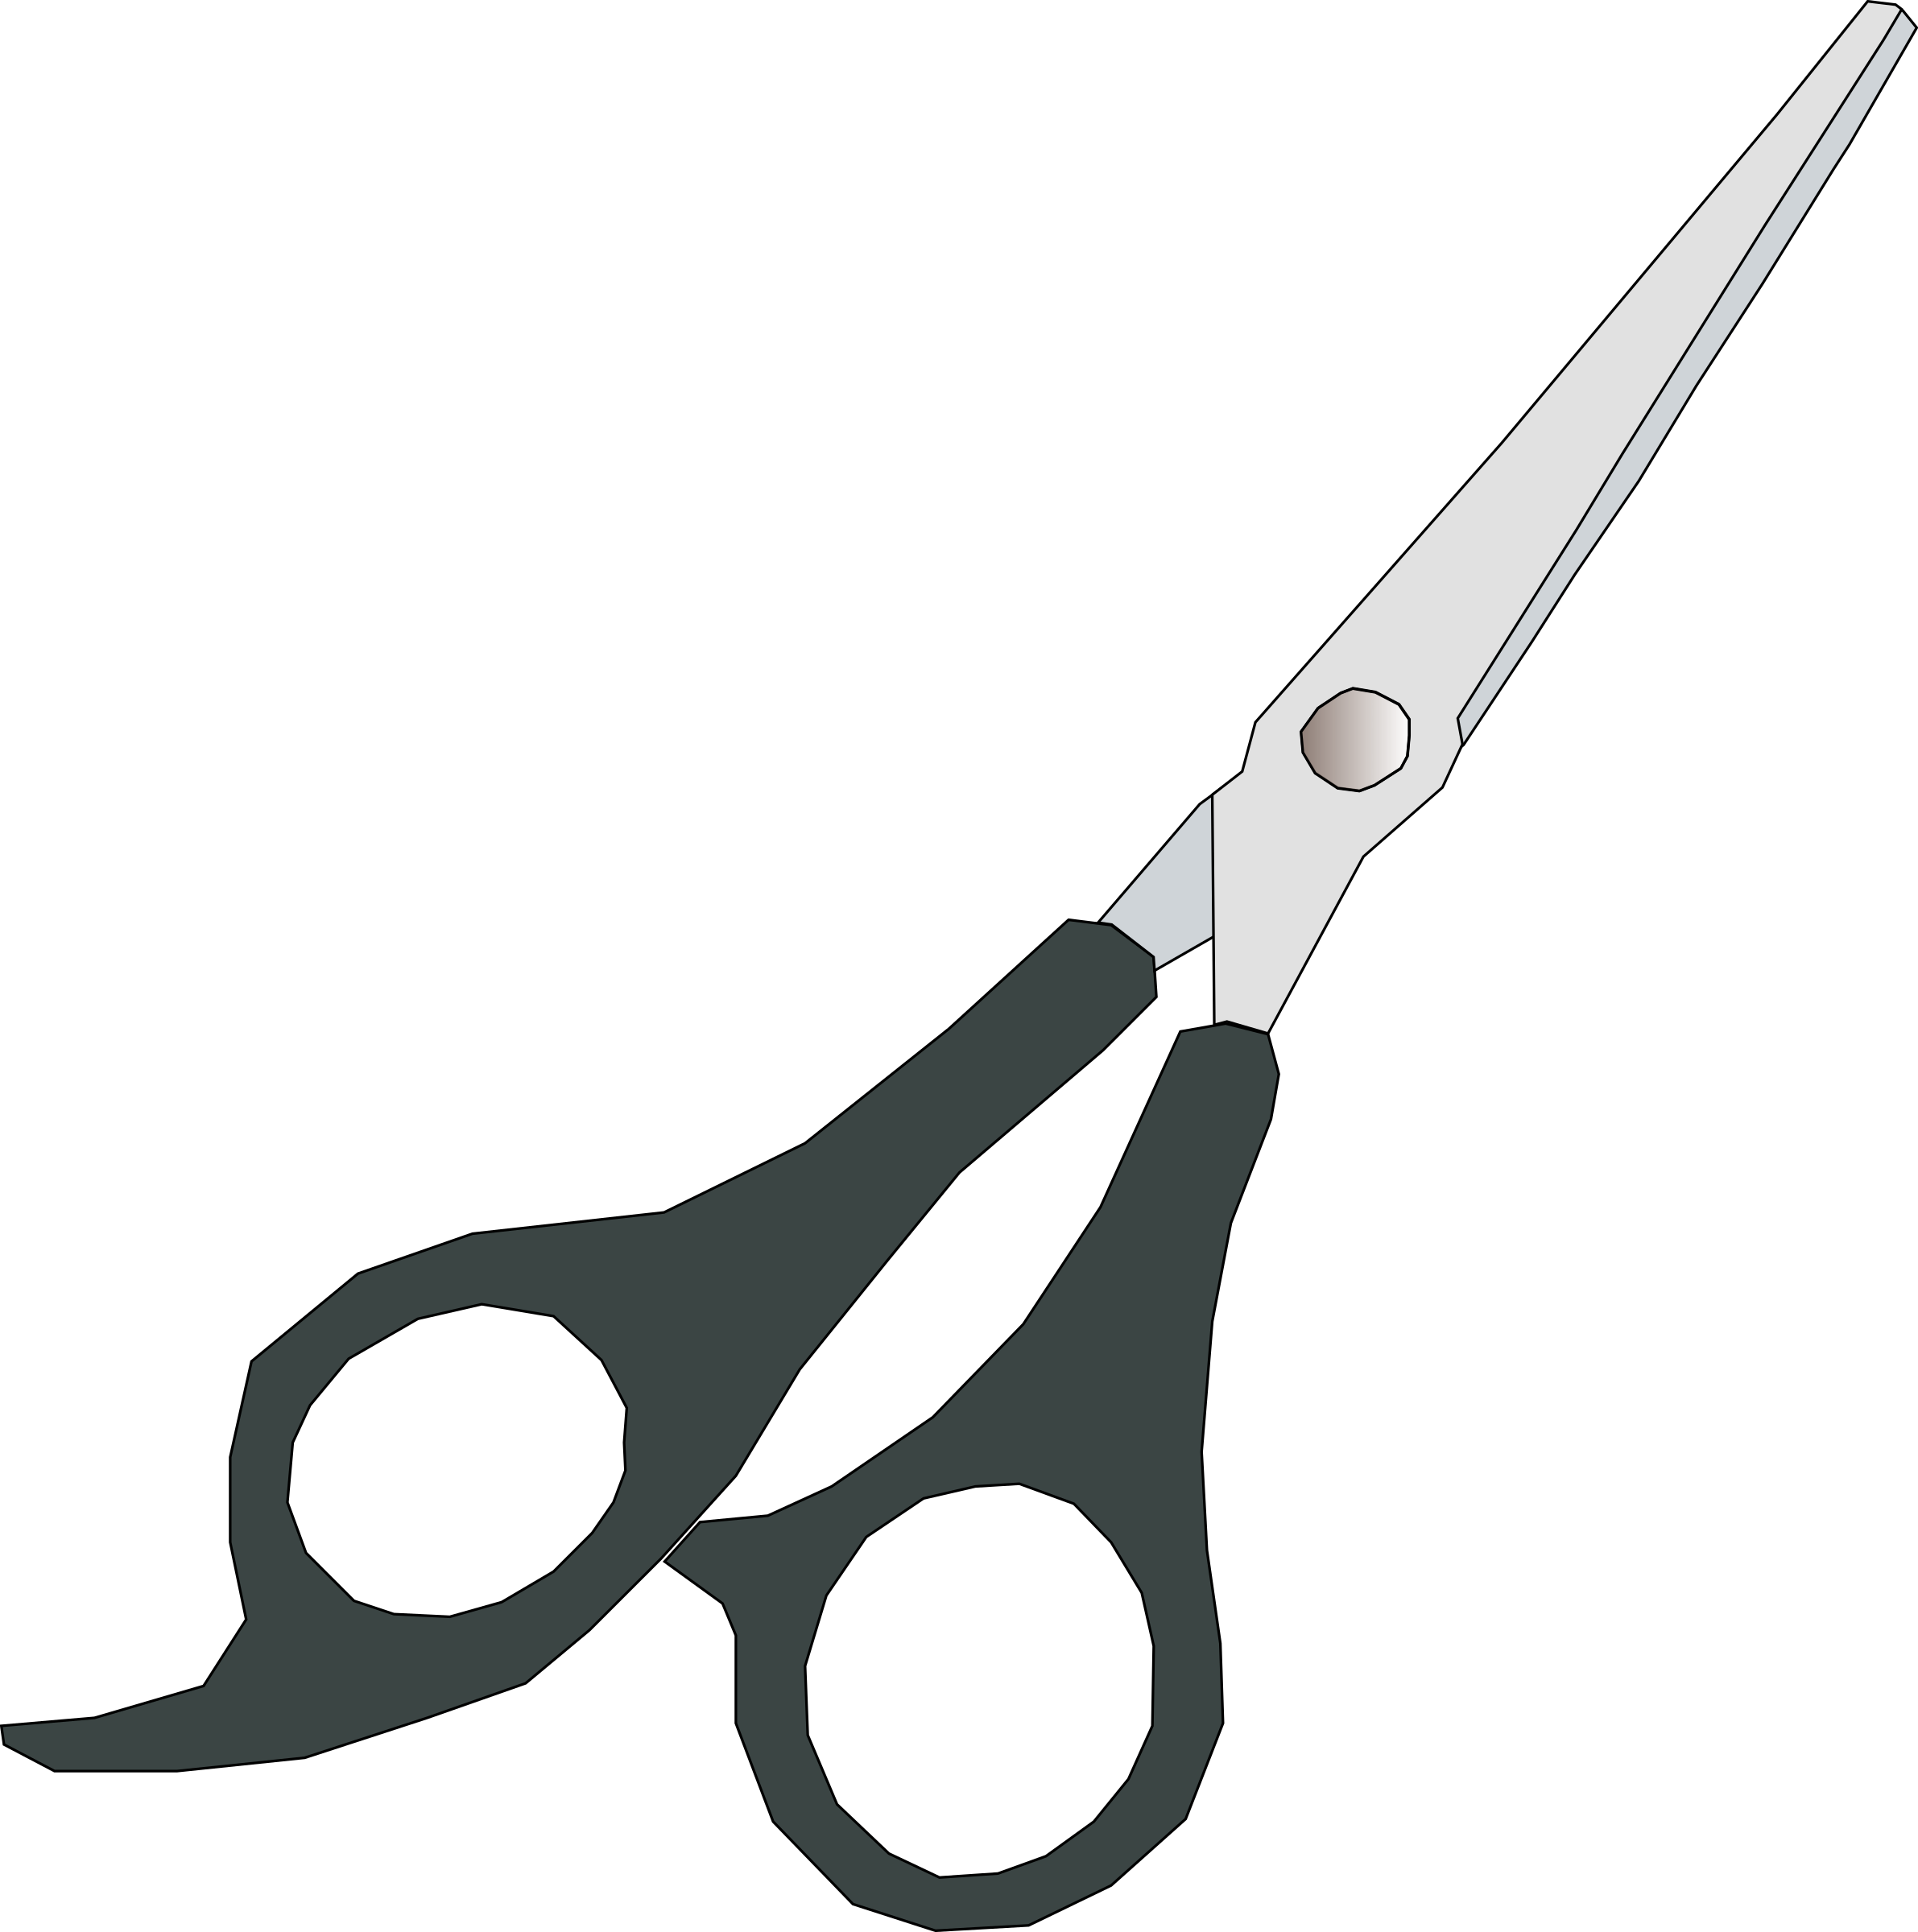 Scissors big image png. Shears clipart use